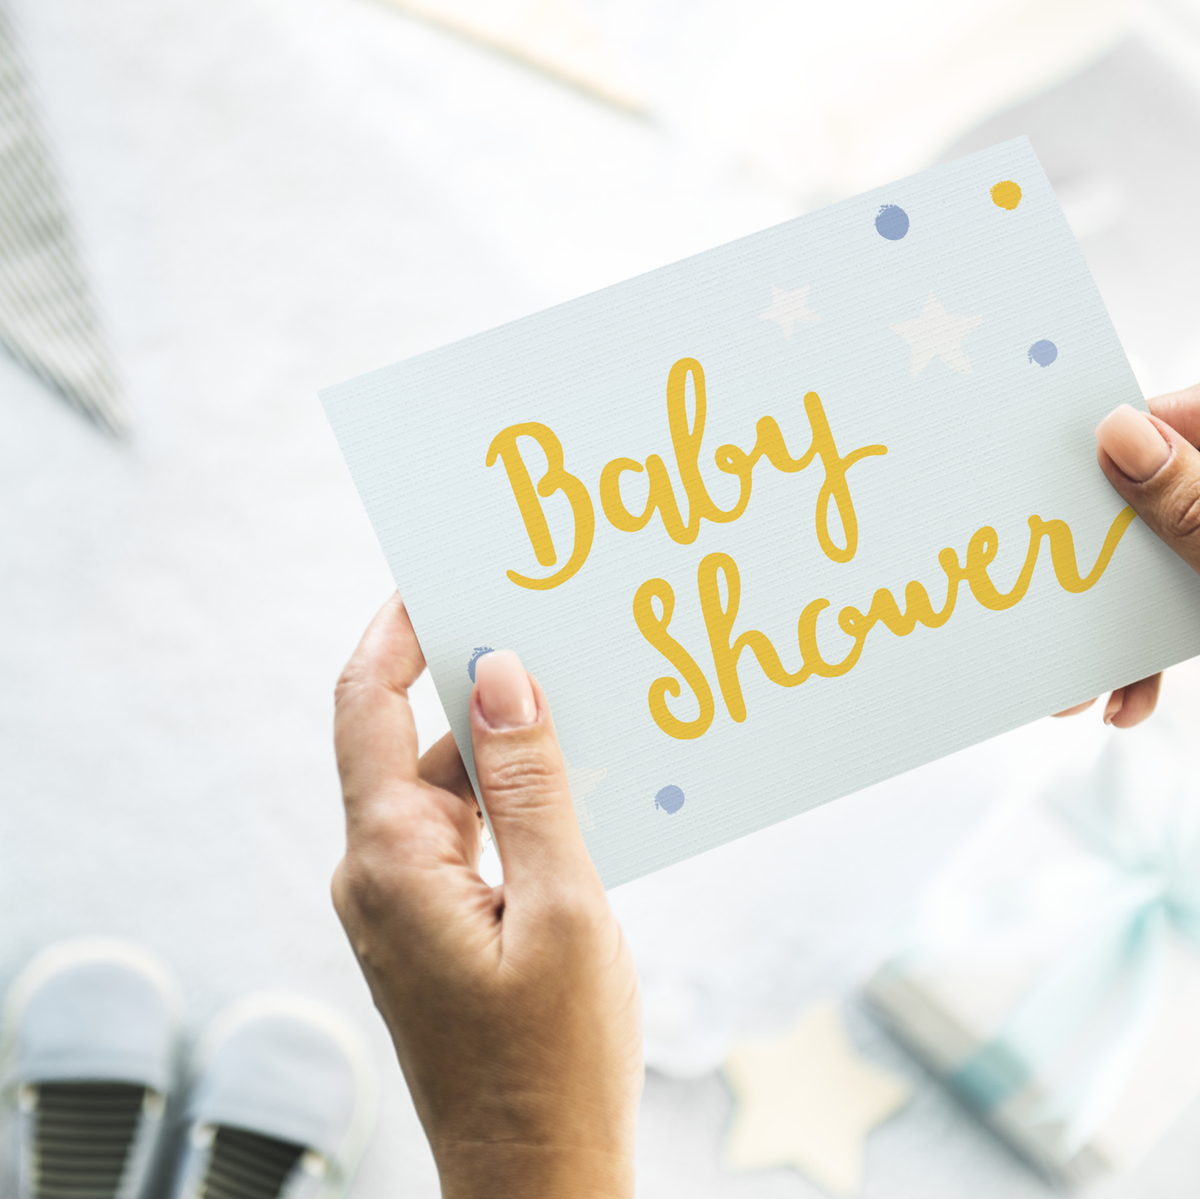 Free Baby Shower Gif Cards